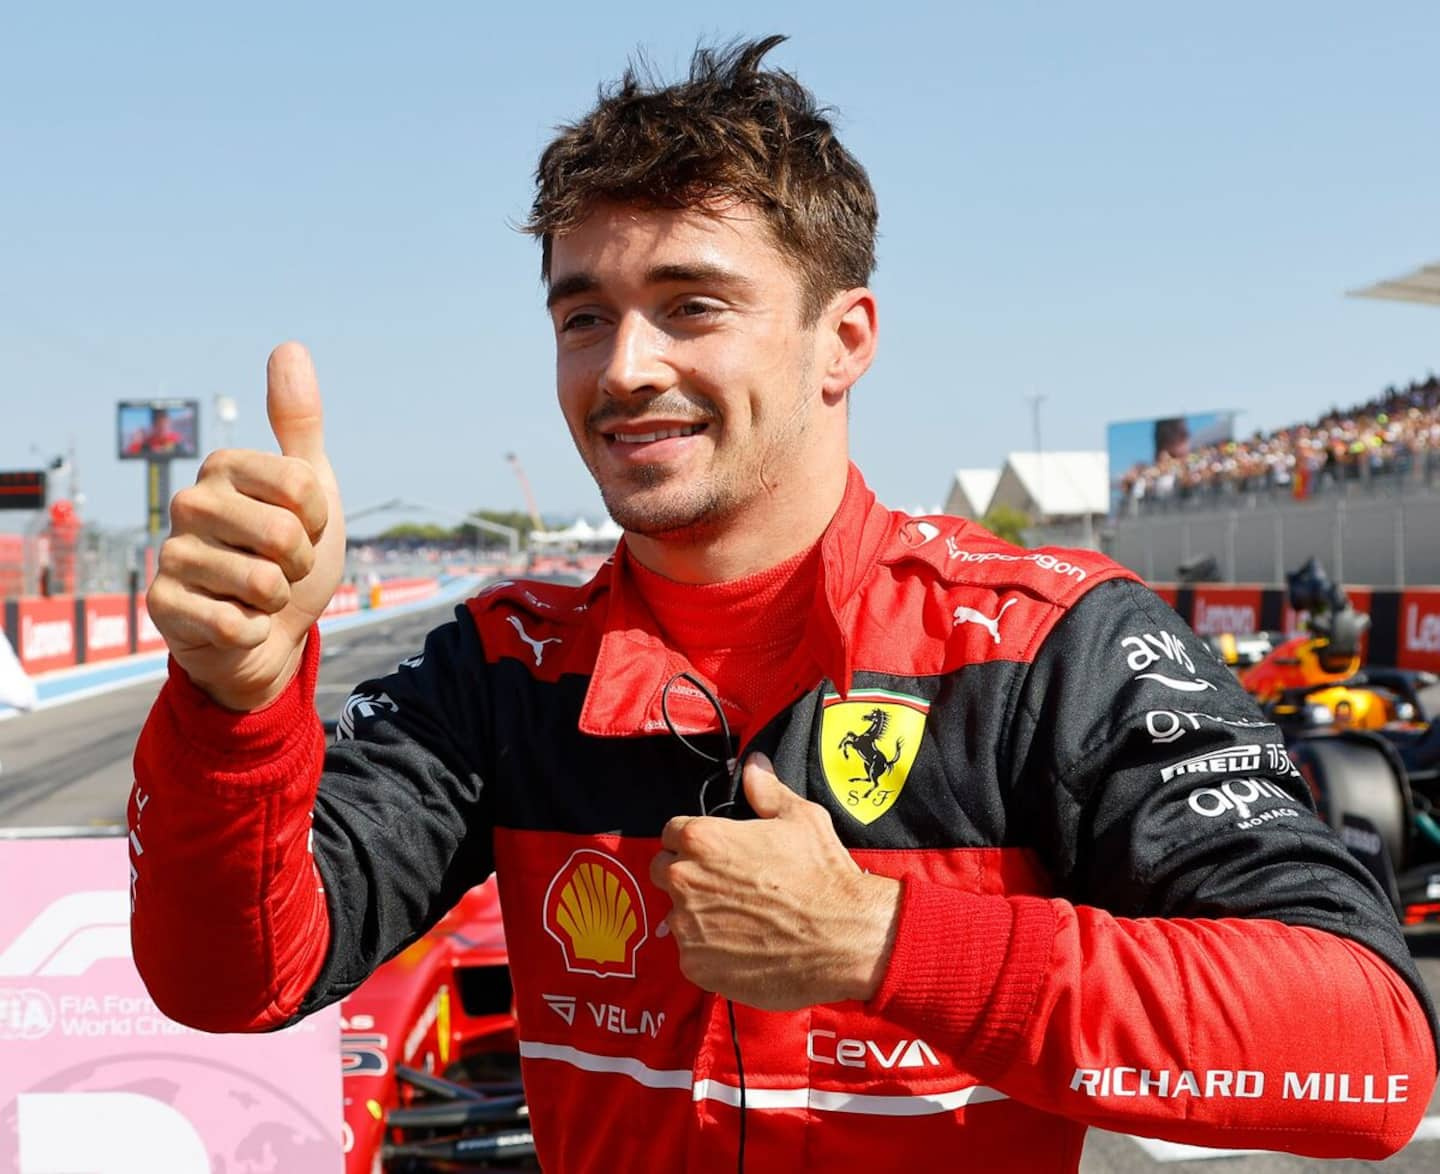 French GP: Leclerc will start in the lead, Stroll far behind